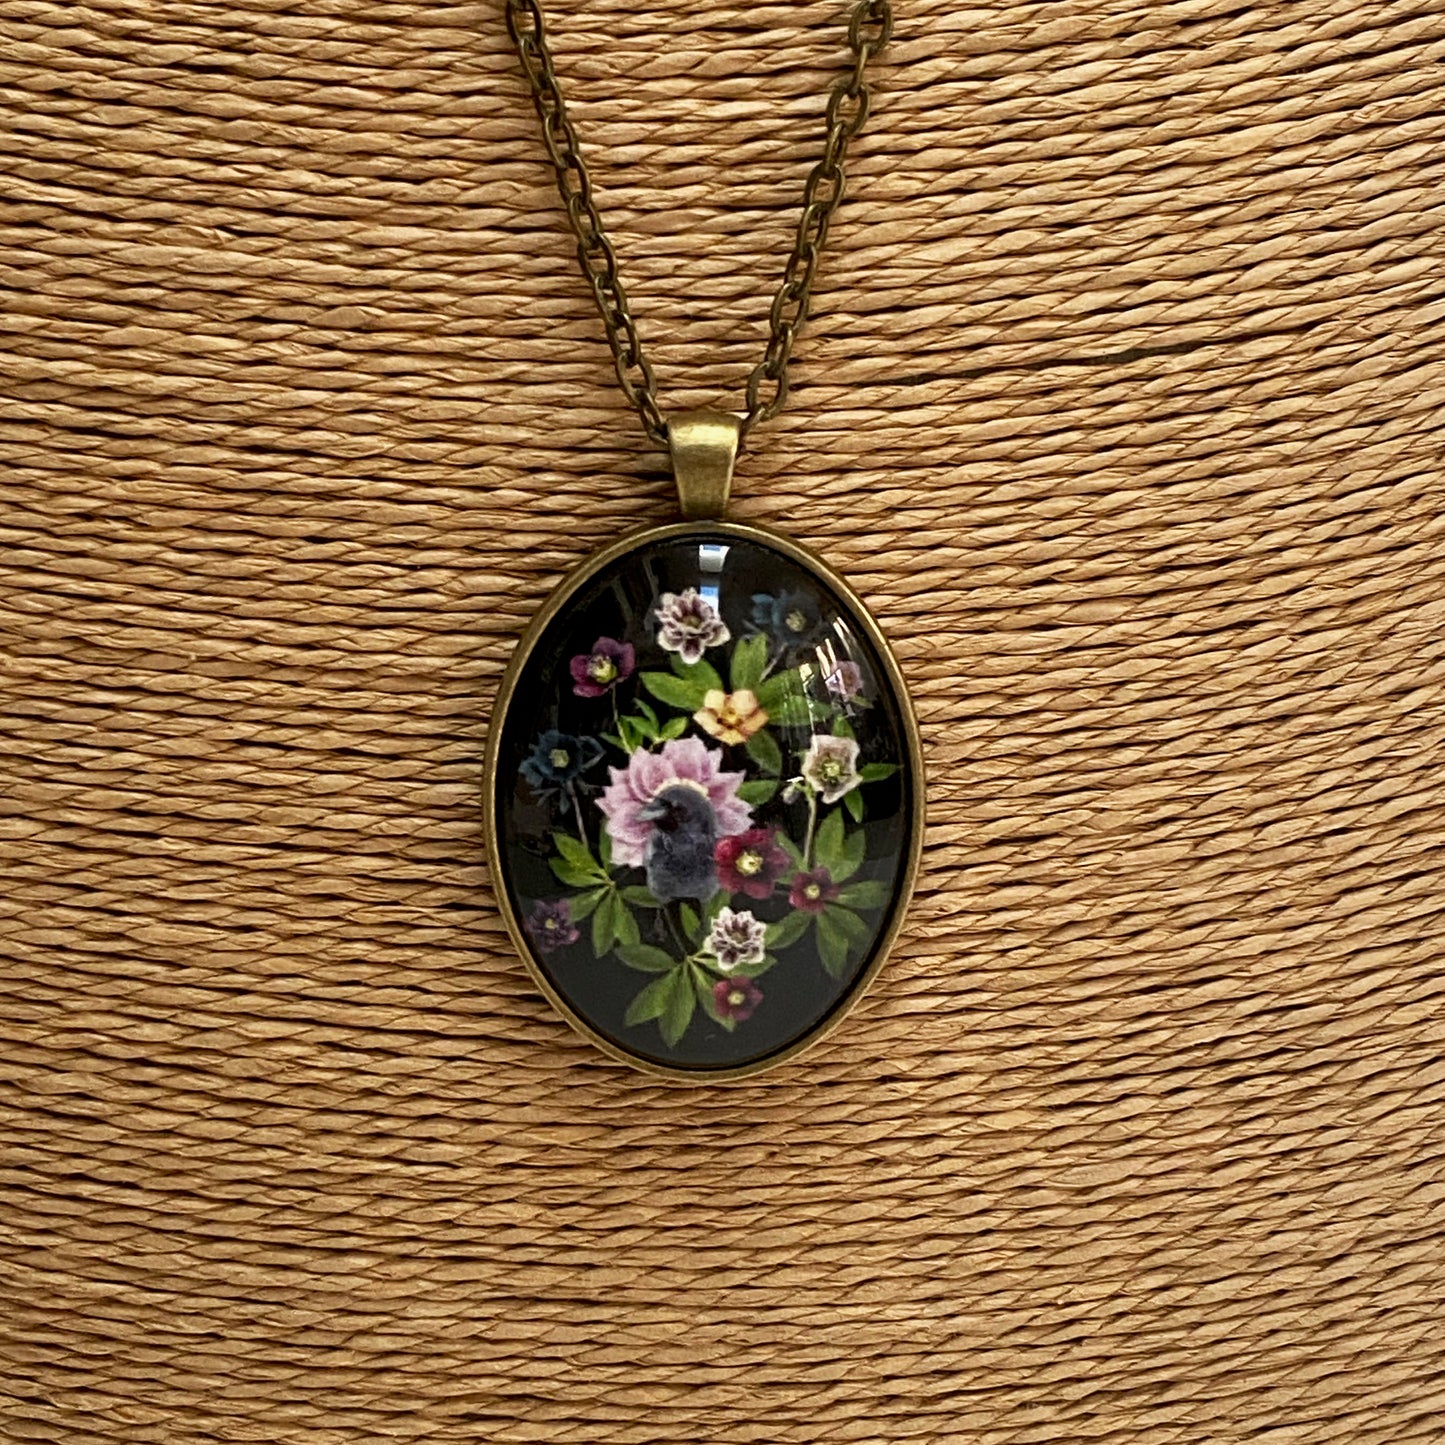 RAVEN GARDEN OF HAPPINESS - Large Glass Pendant